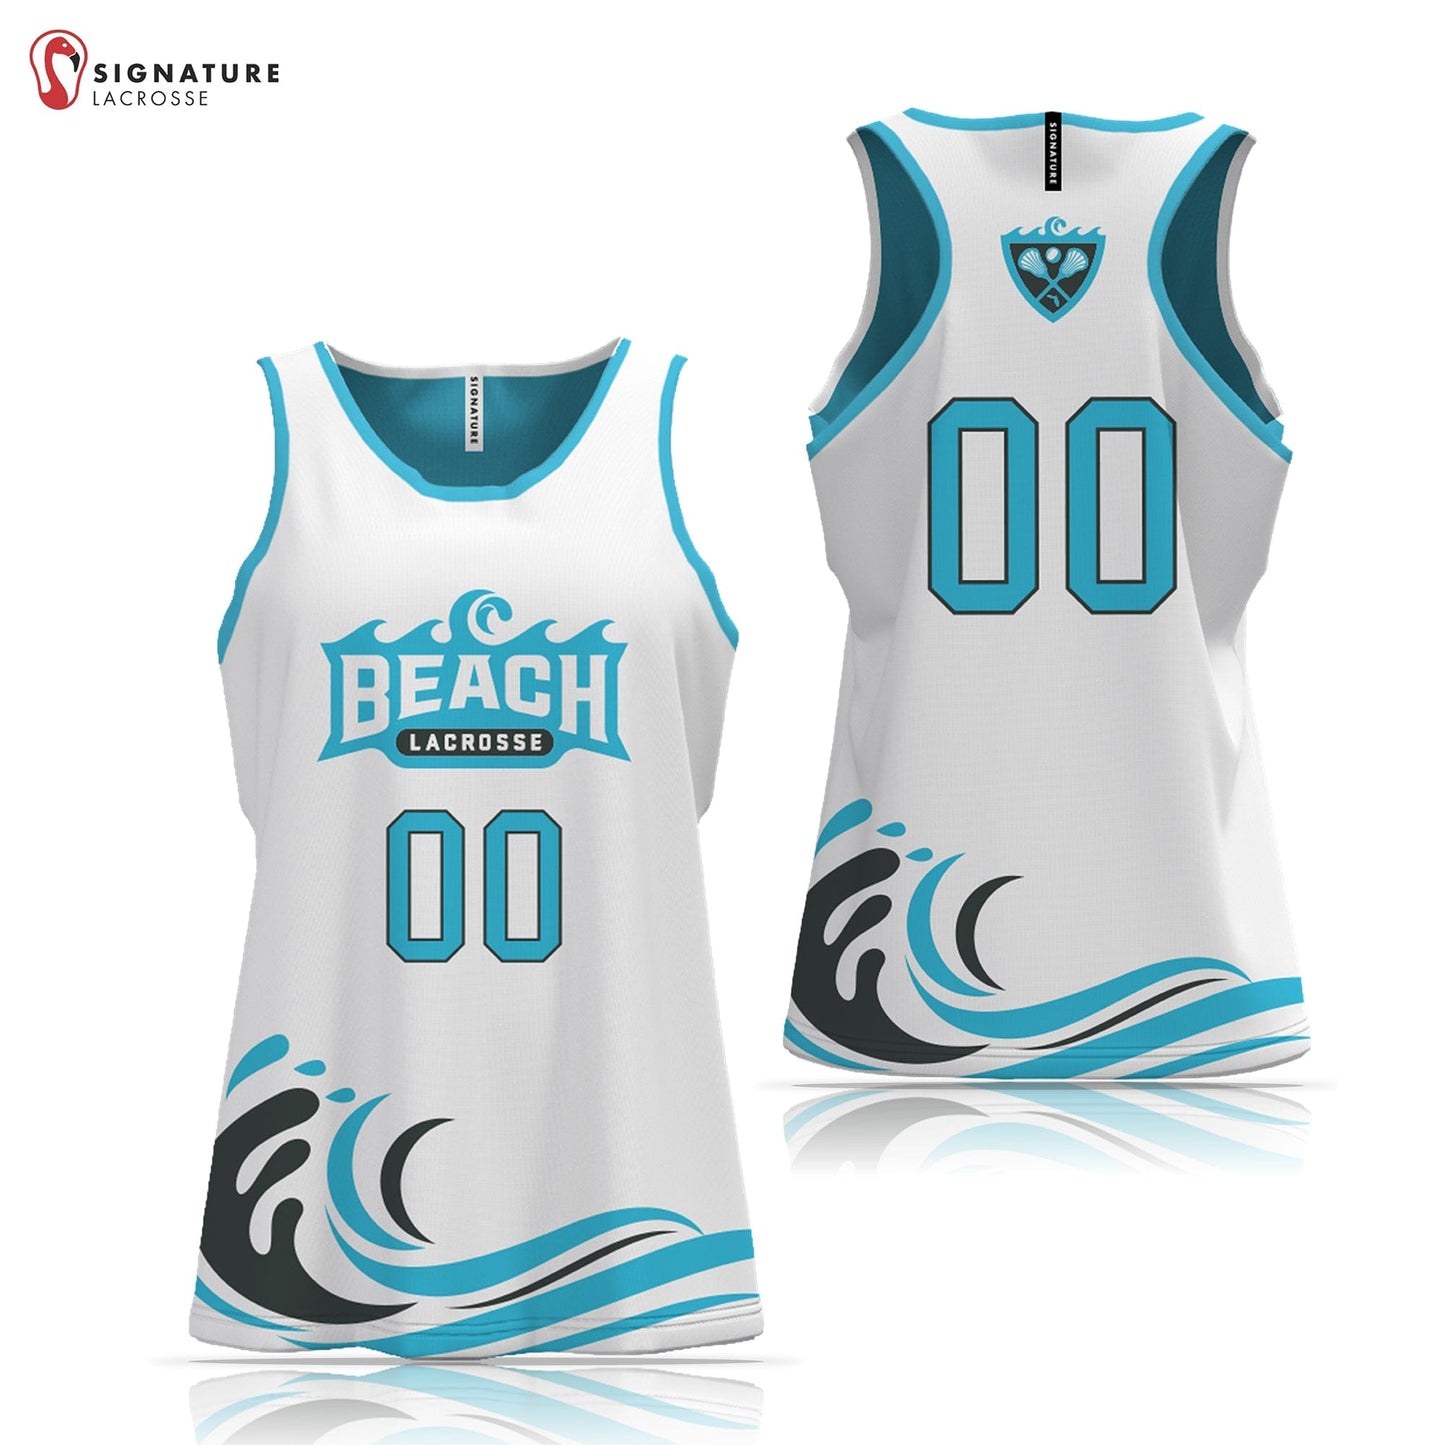 Beach Lacrosse Women's 3 Piece Player Game Package Signature Lacrosse